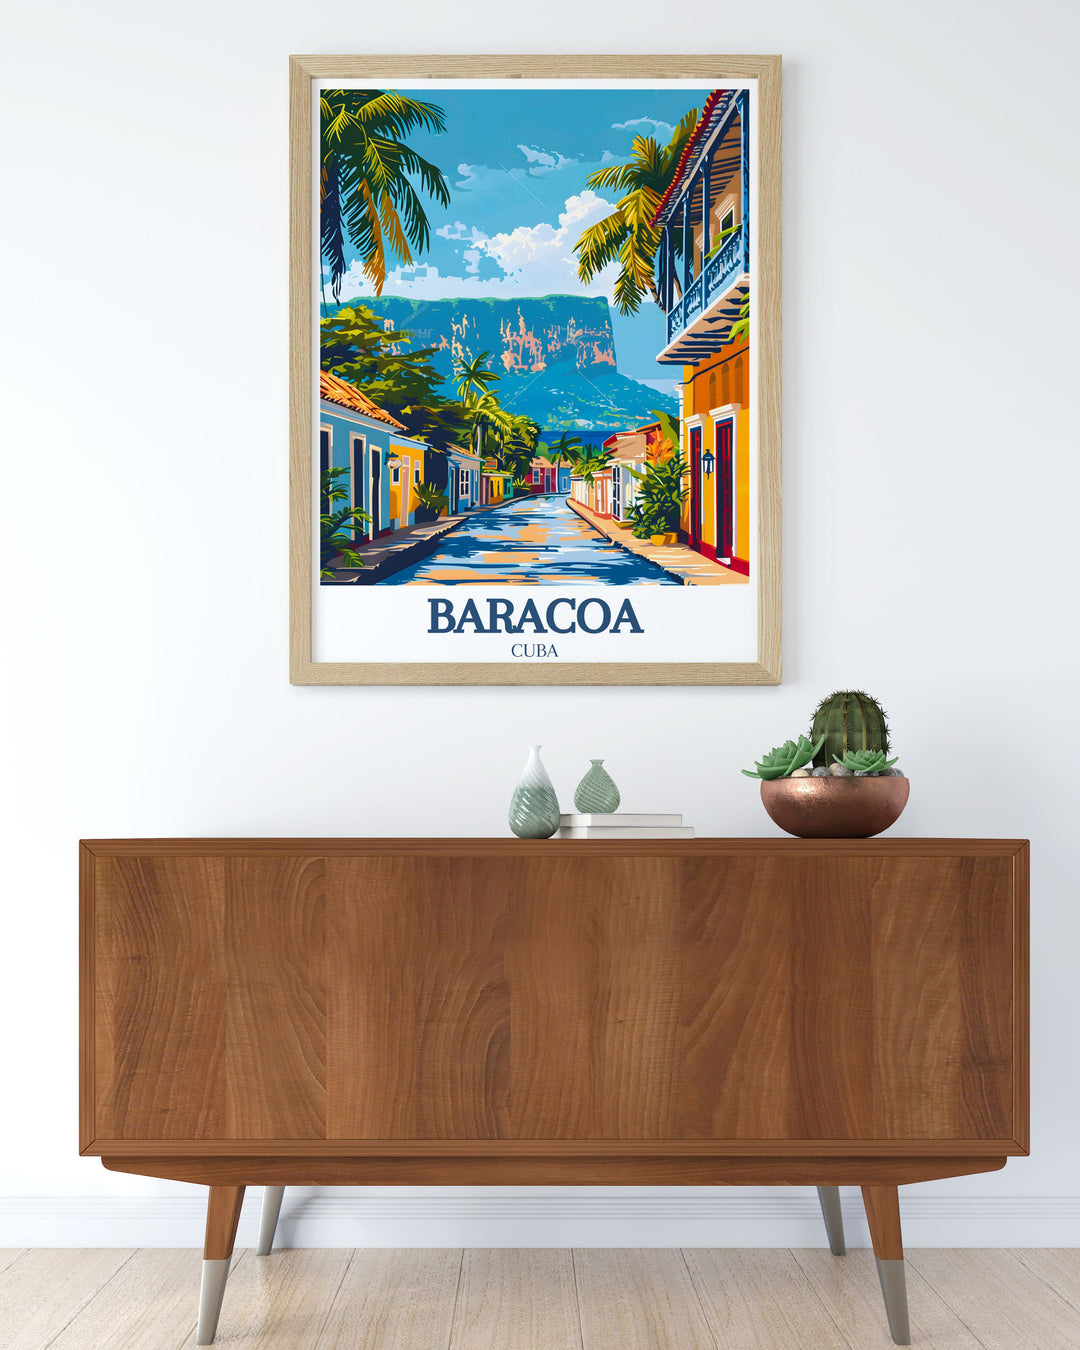 Captivating digital download of Baracoas historic town and El Yunque Mountain, featuring vibrant street scenes and lush surroundings. This print captures the essence of Cubas oldest city, perfect for any art collection or as a travel memento.